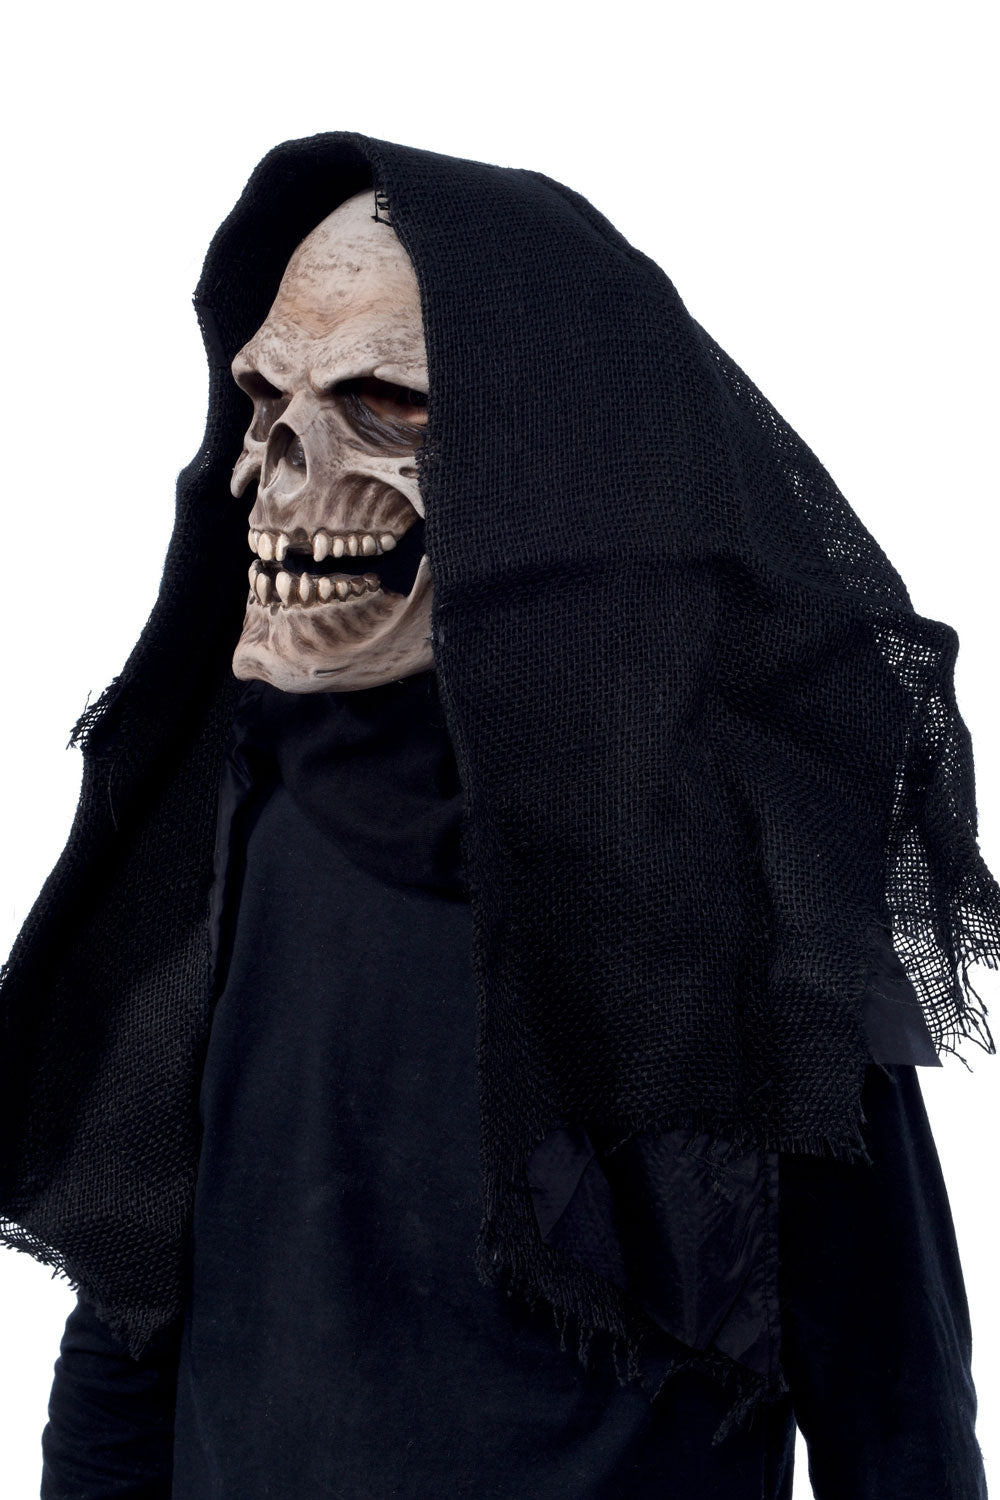 scary grim reaper mask